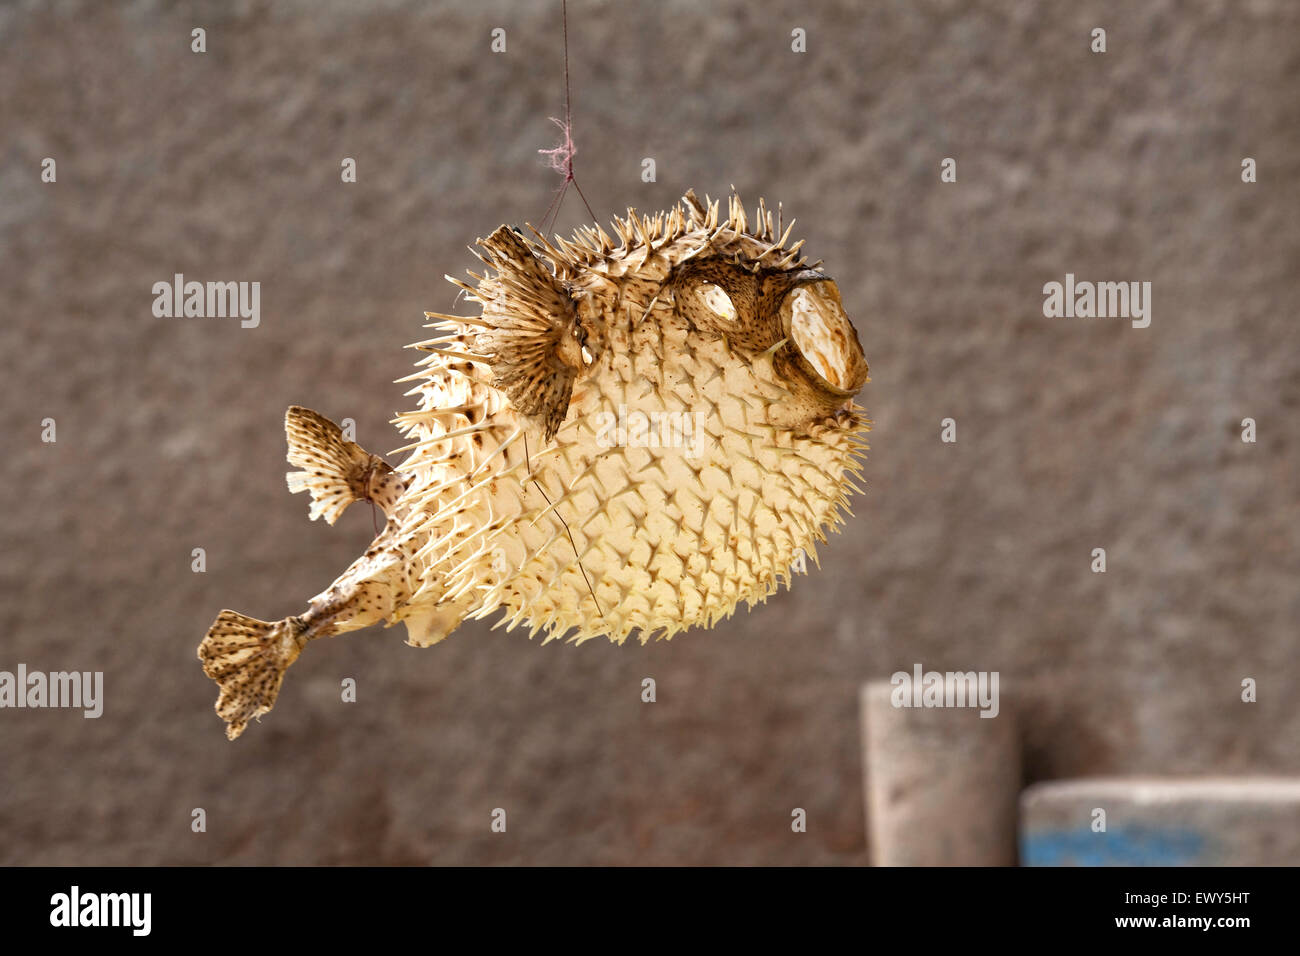 Dried spiny blowfish / pufferfish / balloonfish in the streets of the fishing village Palmeira, Sal, Cape Verde / Cabo Verde Stock Photo